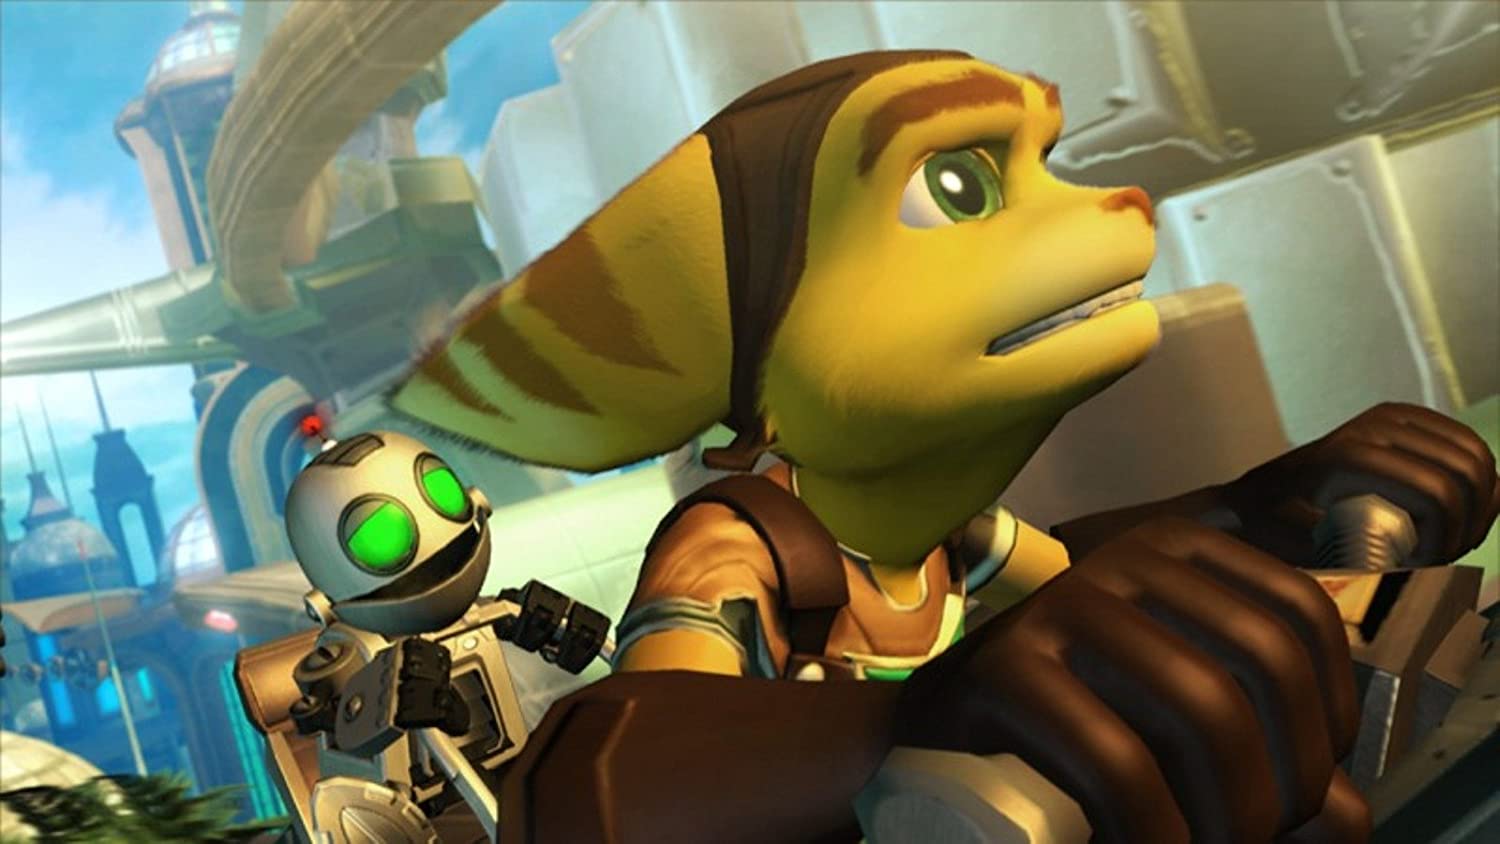 playstation-plus-premium-is-adding-5-more-ratchet-clank-games-this